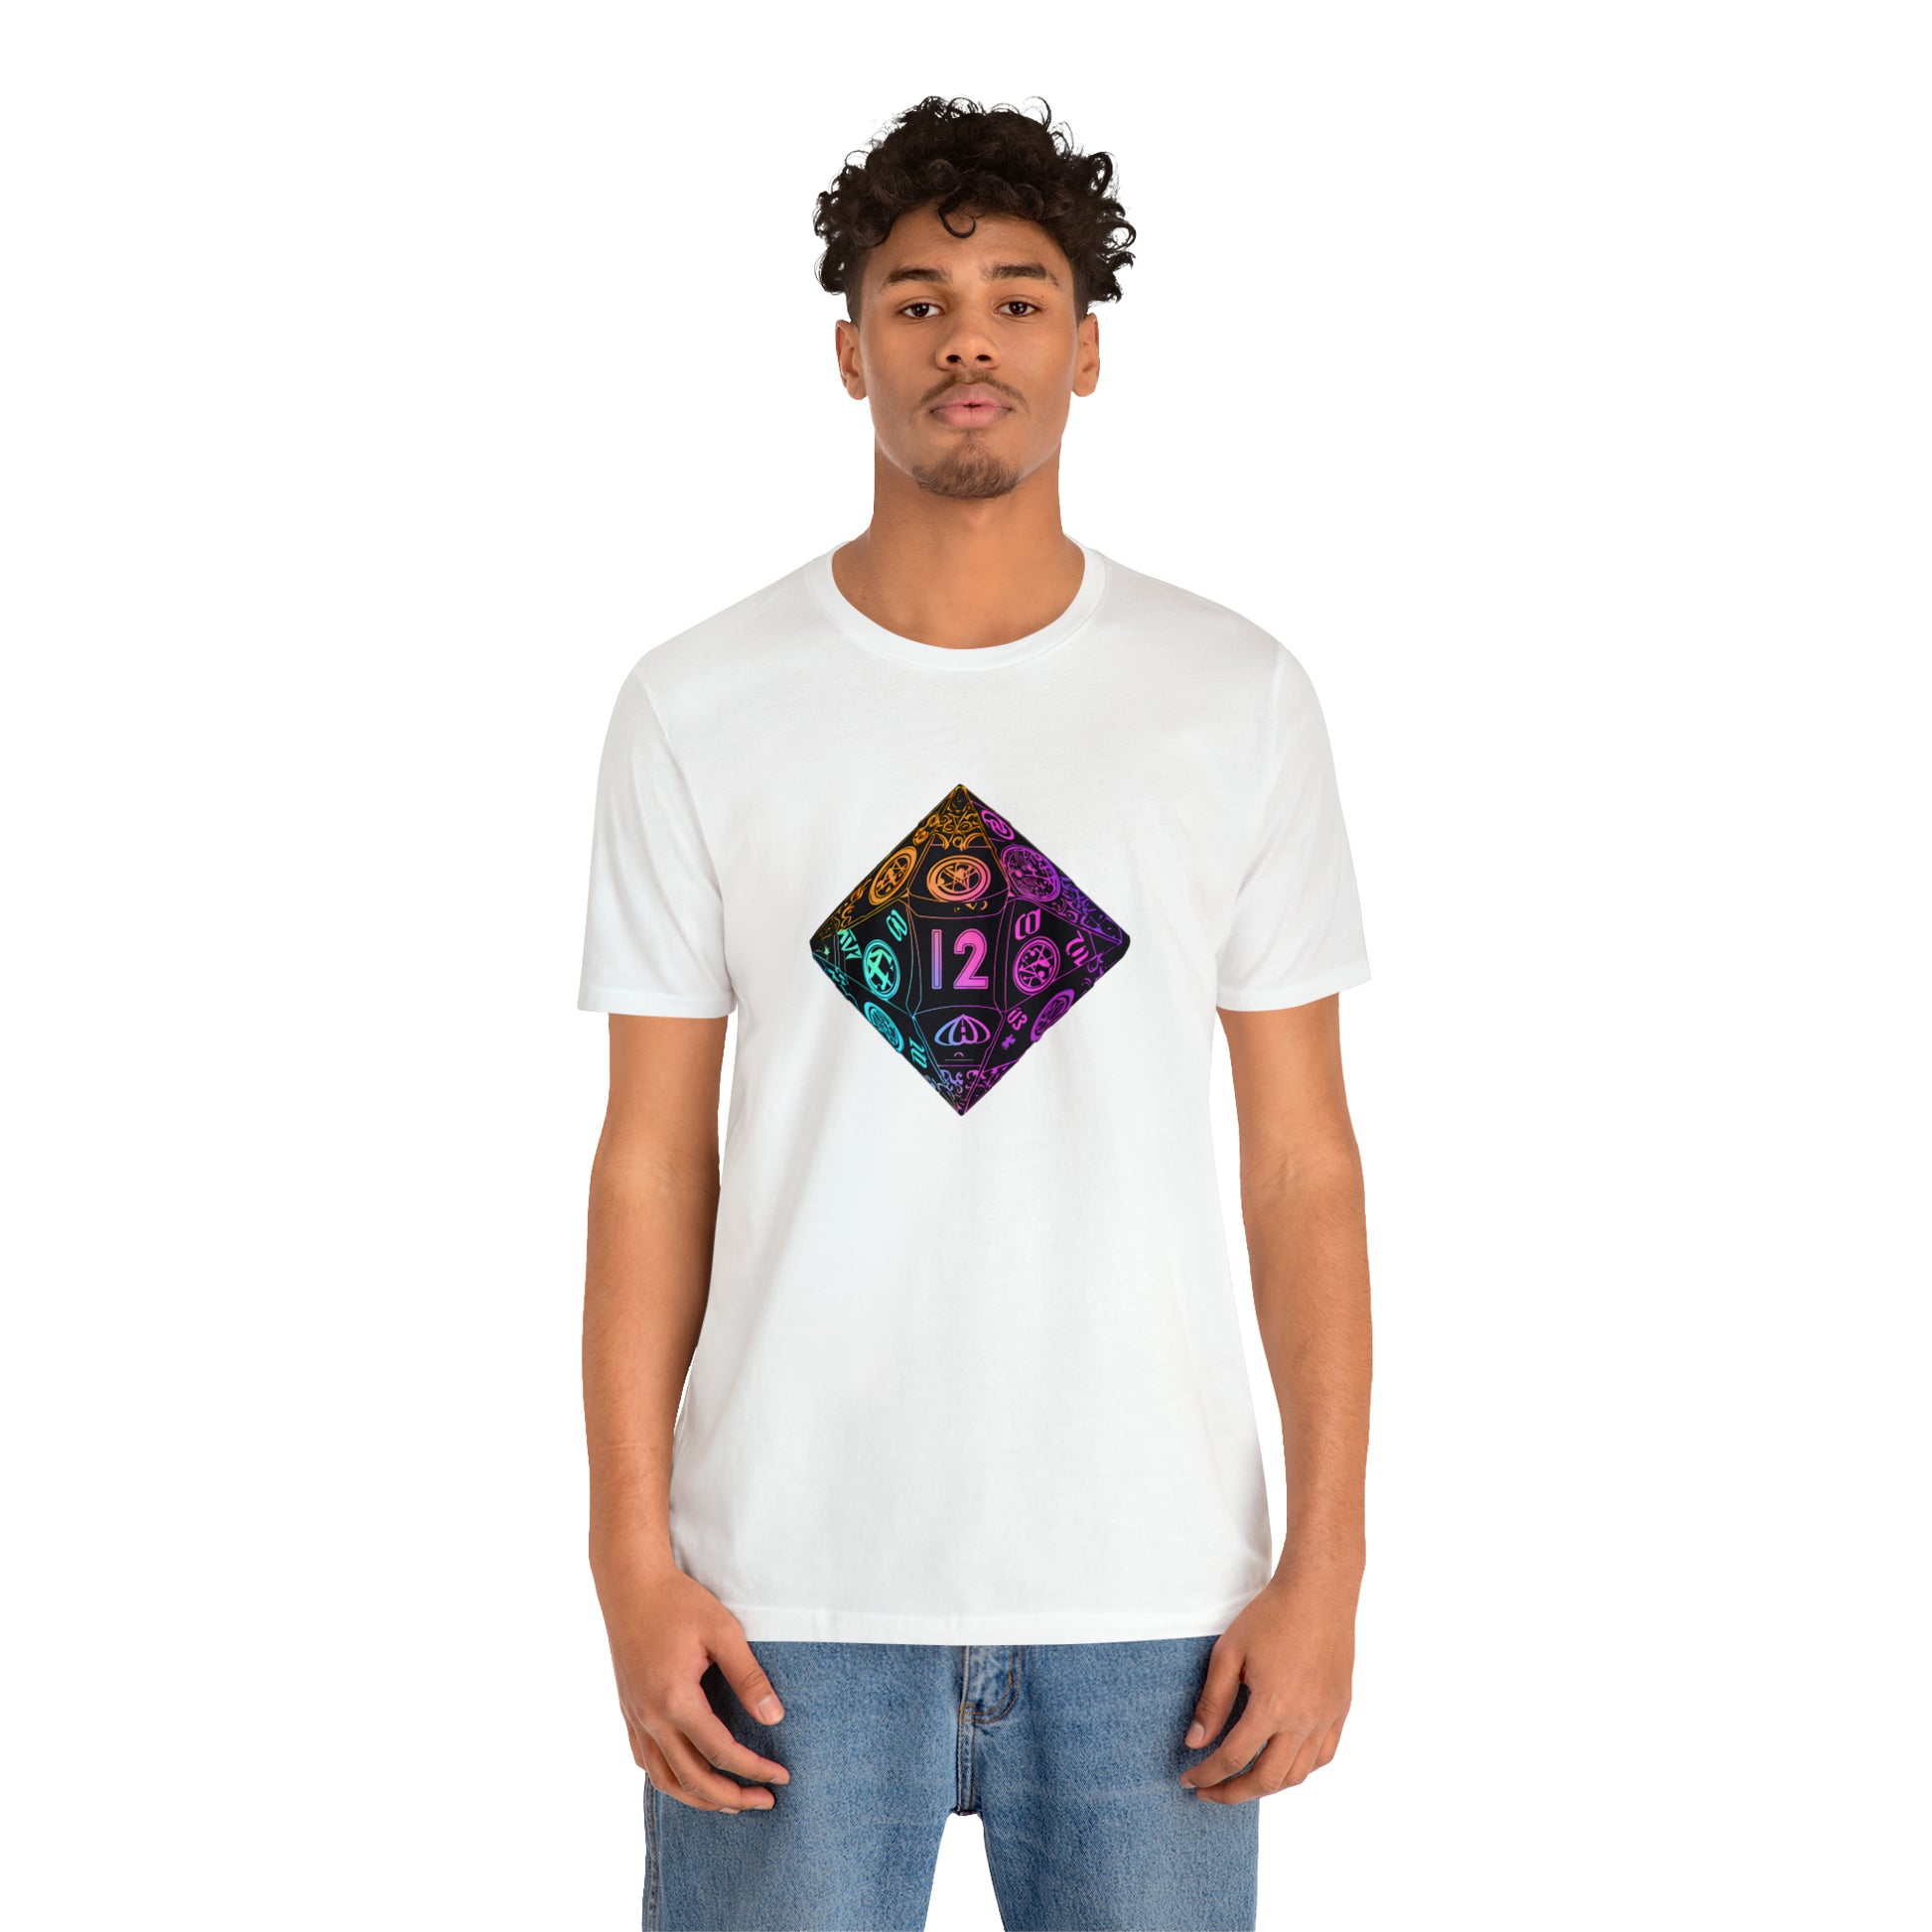 white-quest-thread-tee-shirt-with-large-neon-diamond-dice-on-center